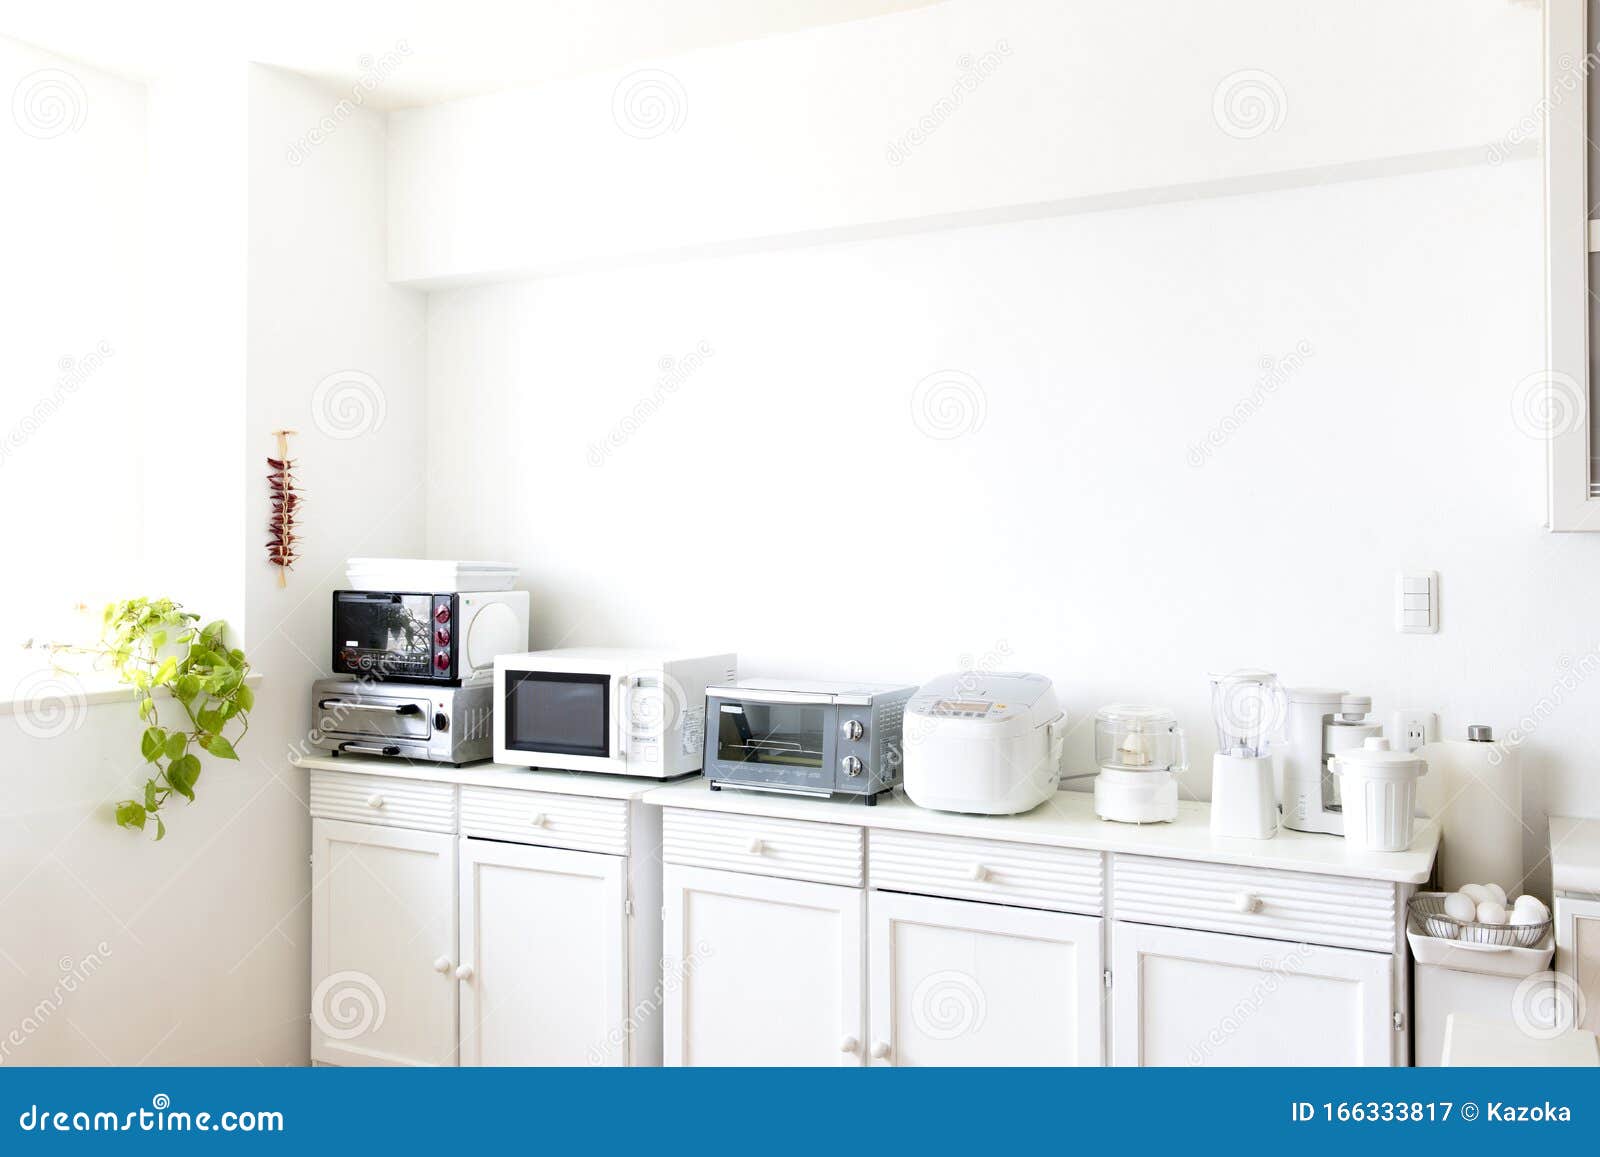 https://thumbs.dreamstime.com/z/japan-kitchen-small-cooking-appliances-lined-up-japanese-kitchens-small-cookware-lined-up-white-room-166333817.jpg